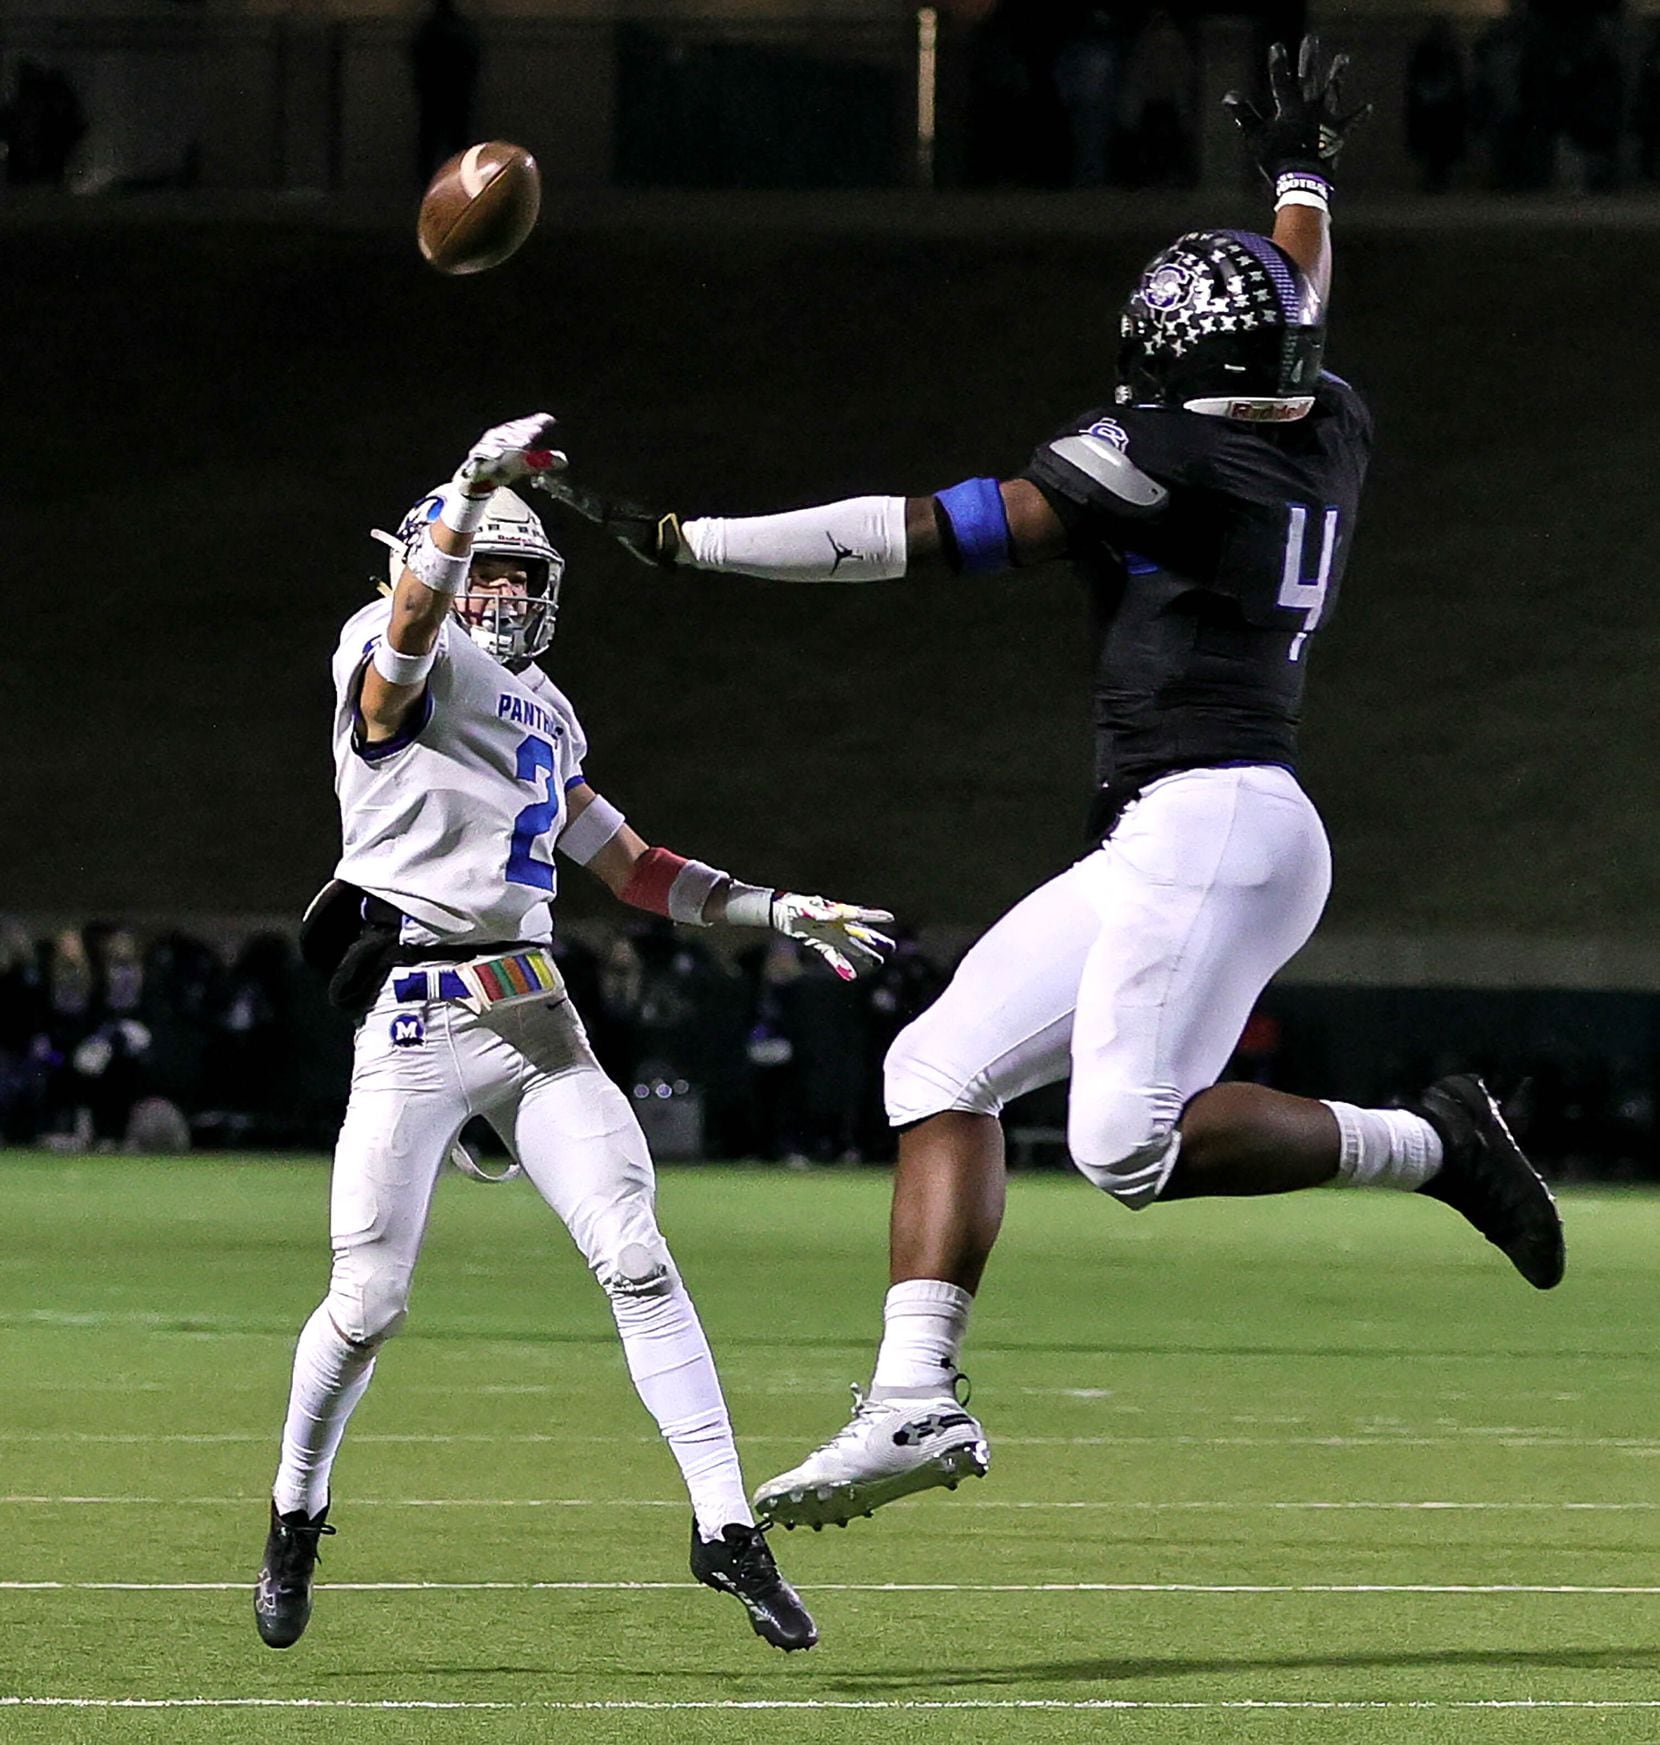 Midlothian wide receiver Carsen Bates attempts a pass over Mansfield Summit defensive lineman Joseph Adedire (4) during the first half of the 5A Division I Region I semifinal high school football playoff game played on November 26, 2021 at Gopher-Warrior Bowl in Grand Prairie.  (Steve Nurenberg/Special Contributor)